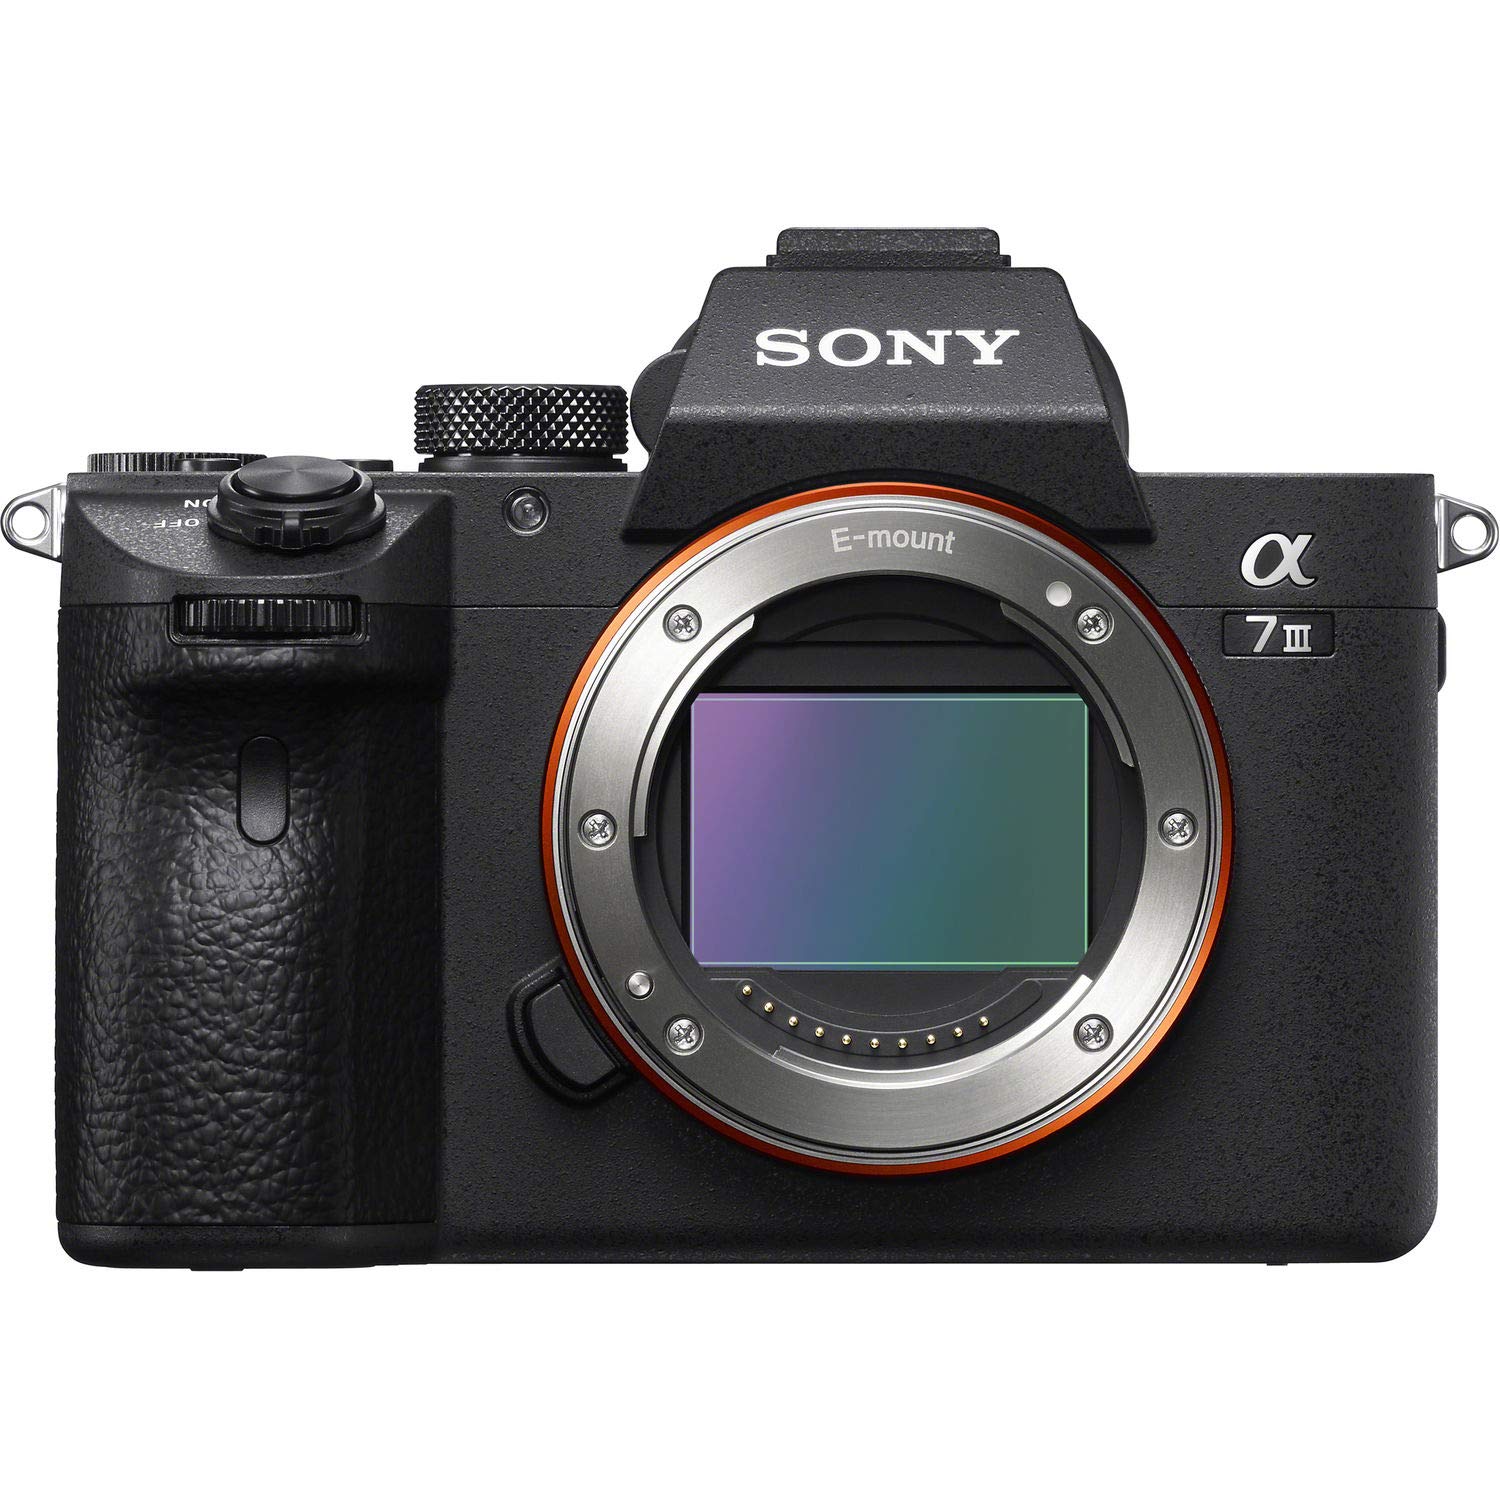 Sony Alpha a7 III Mirrorless Digital Camera (Body Only) with Camera Cleaning Kit Bundle + Camera Case